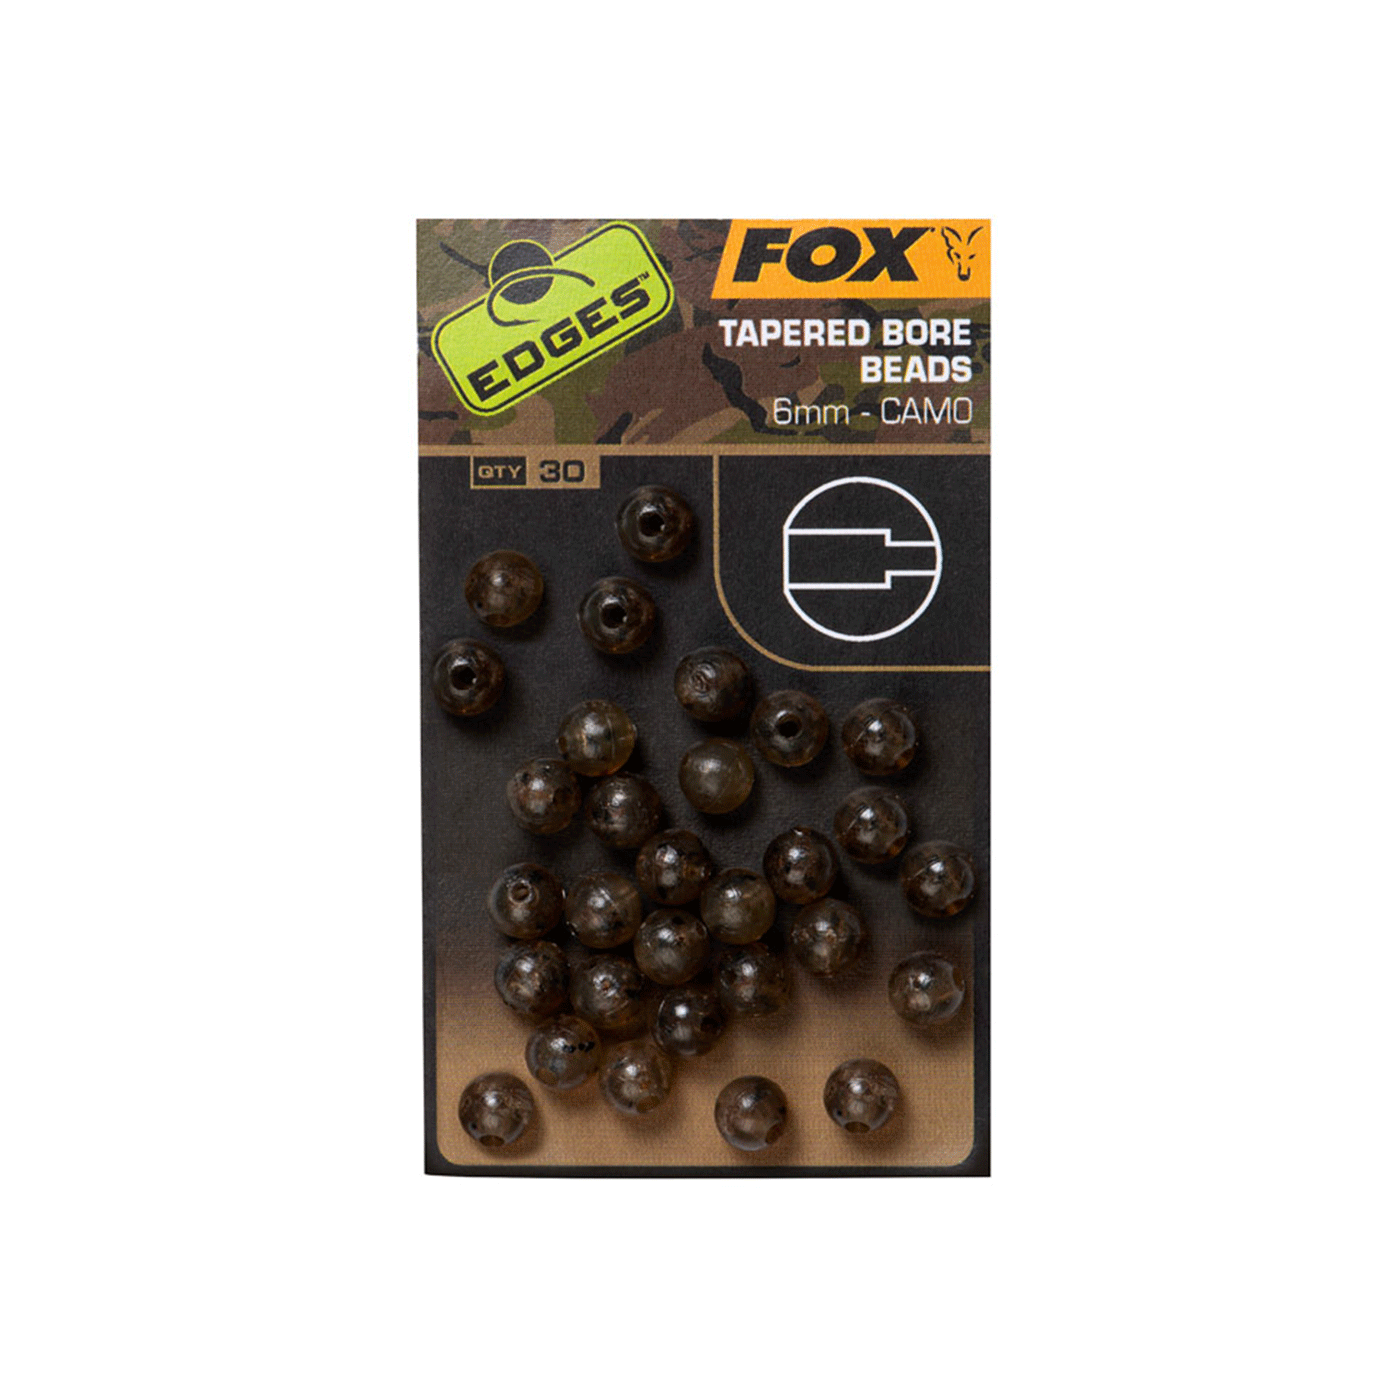 FOX - EDGES™ TAPERED BORE BEADS 6mm - CAMO (30PZ)